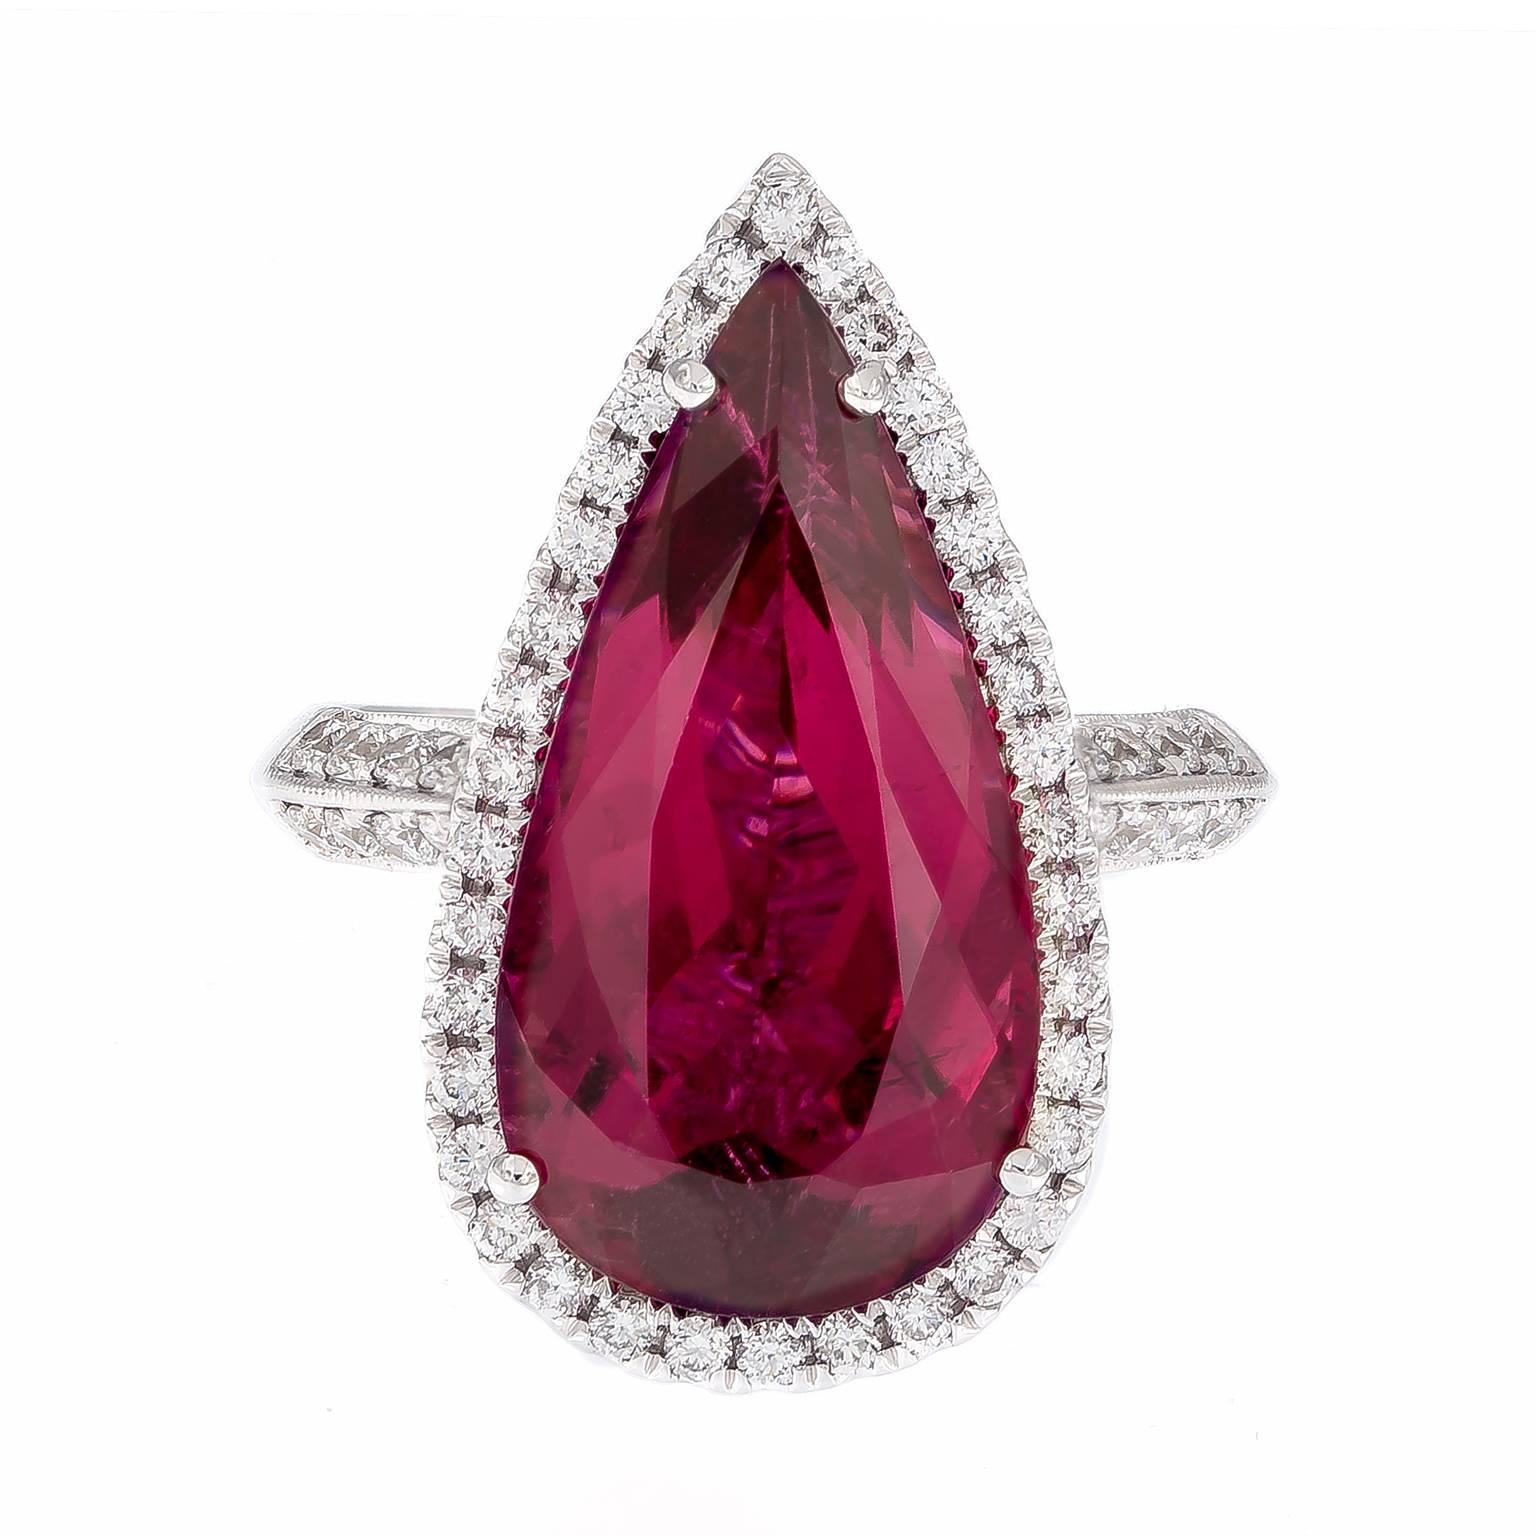 Exquisitely crafted 18k white gold ring showcases a 7.46 carat pear shape rubelite. Center stone is beautifully accented with white diamonds and perfectly balanced by diamonds running down the shank, as well as on the intricate basketwork on the